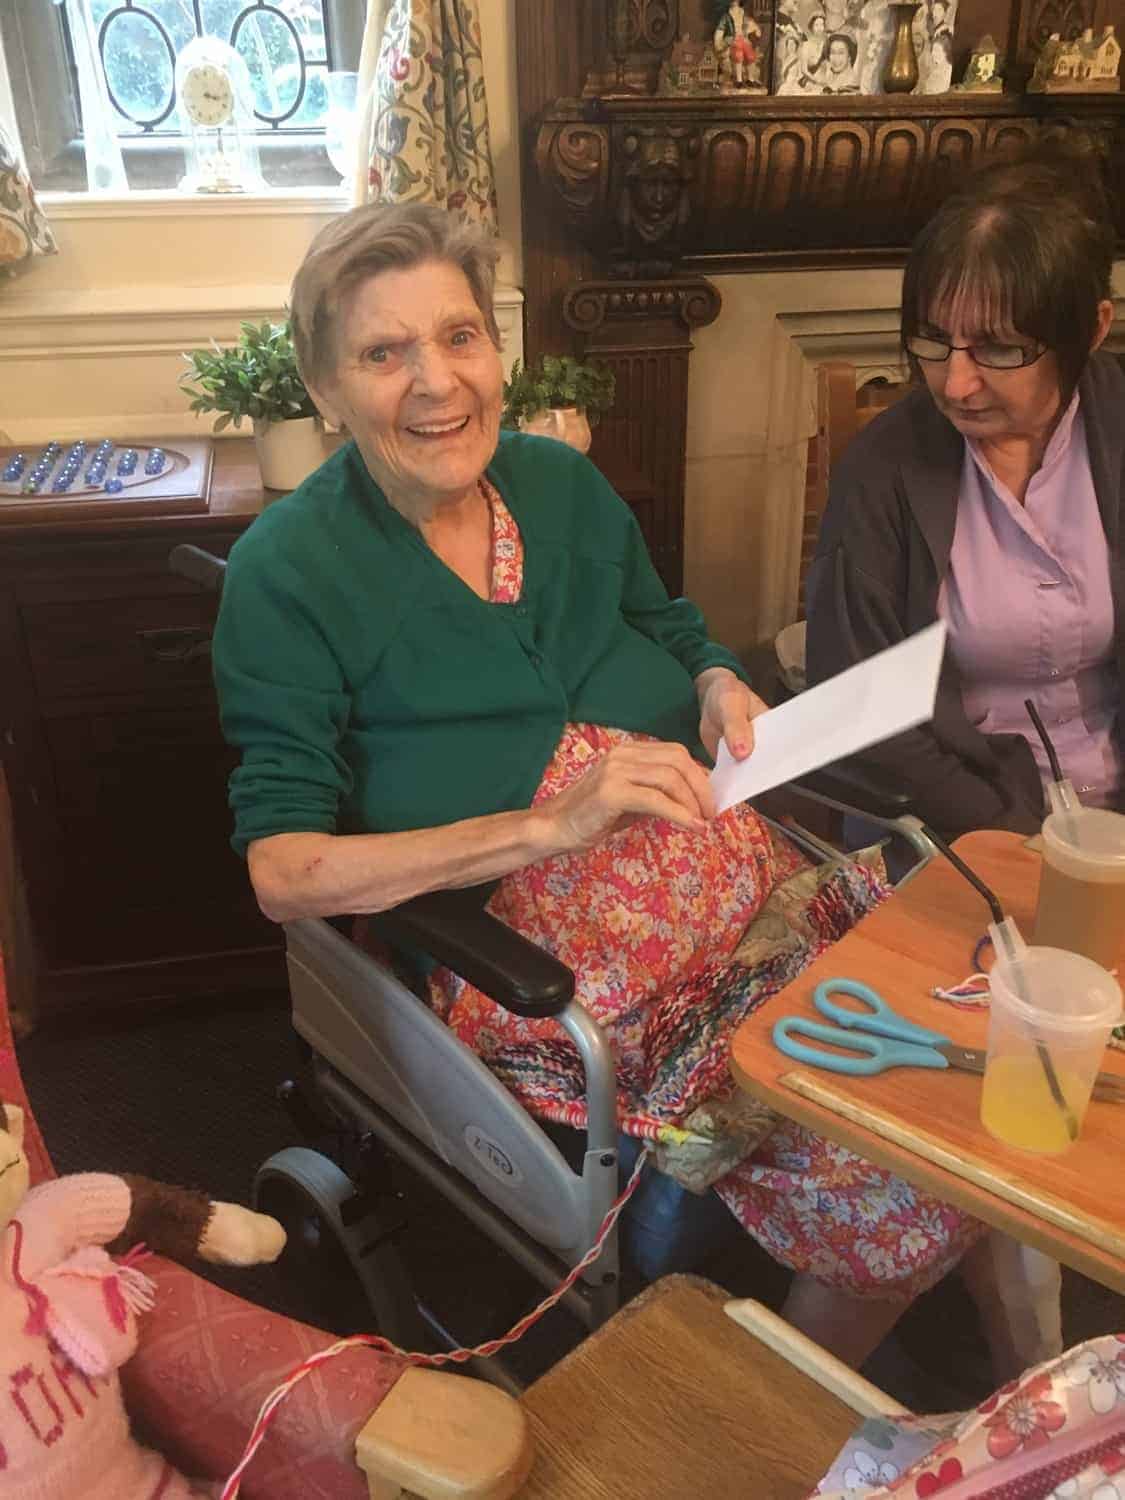 An elderly lady in a wheelchair with a bright green cardigan and floral dress is smiling brightly as she looks at the camera, whilst a woman sitting next to her assists her with some papers. They appear